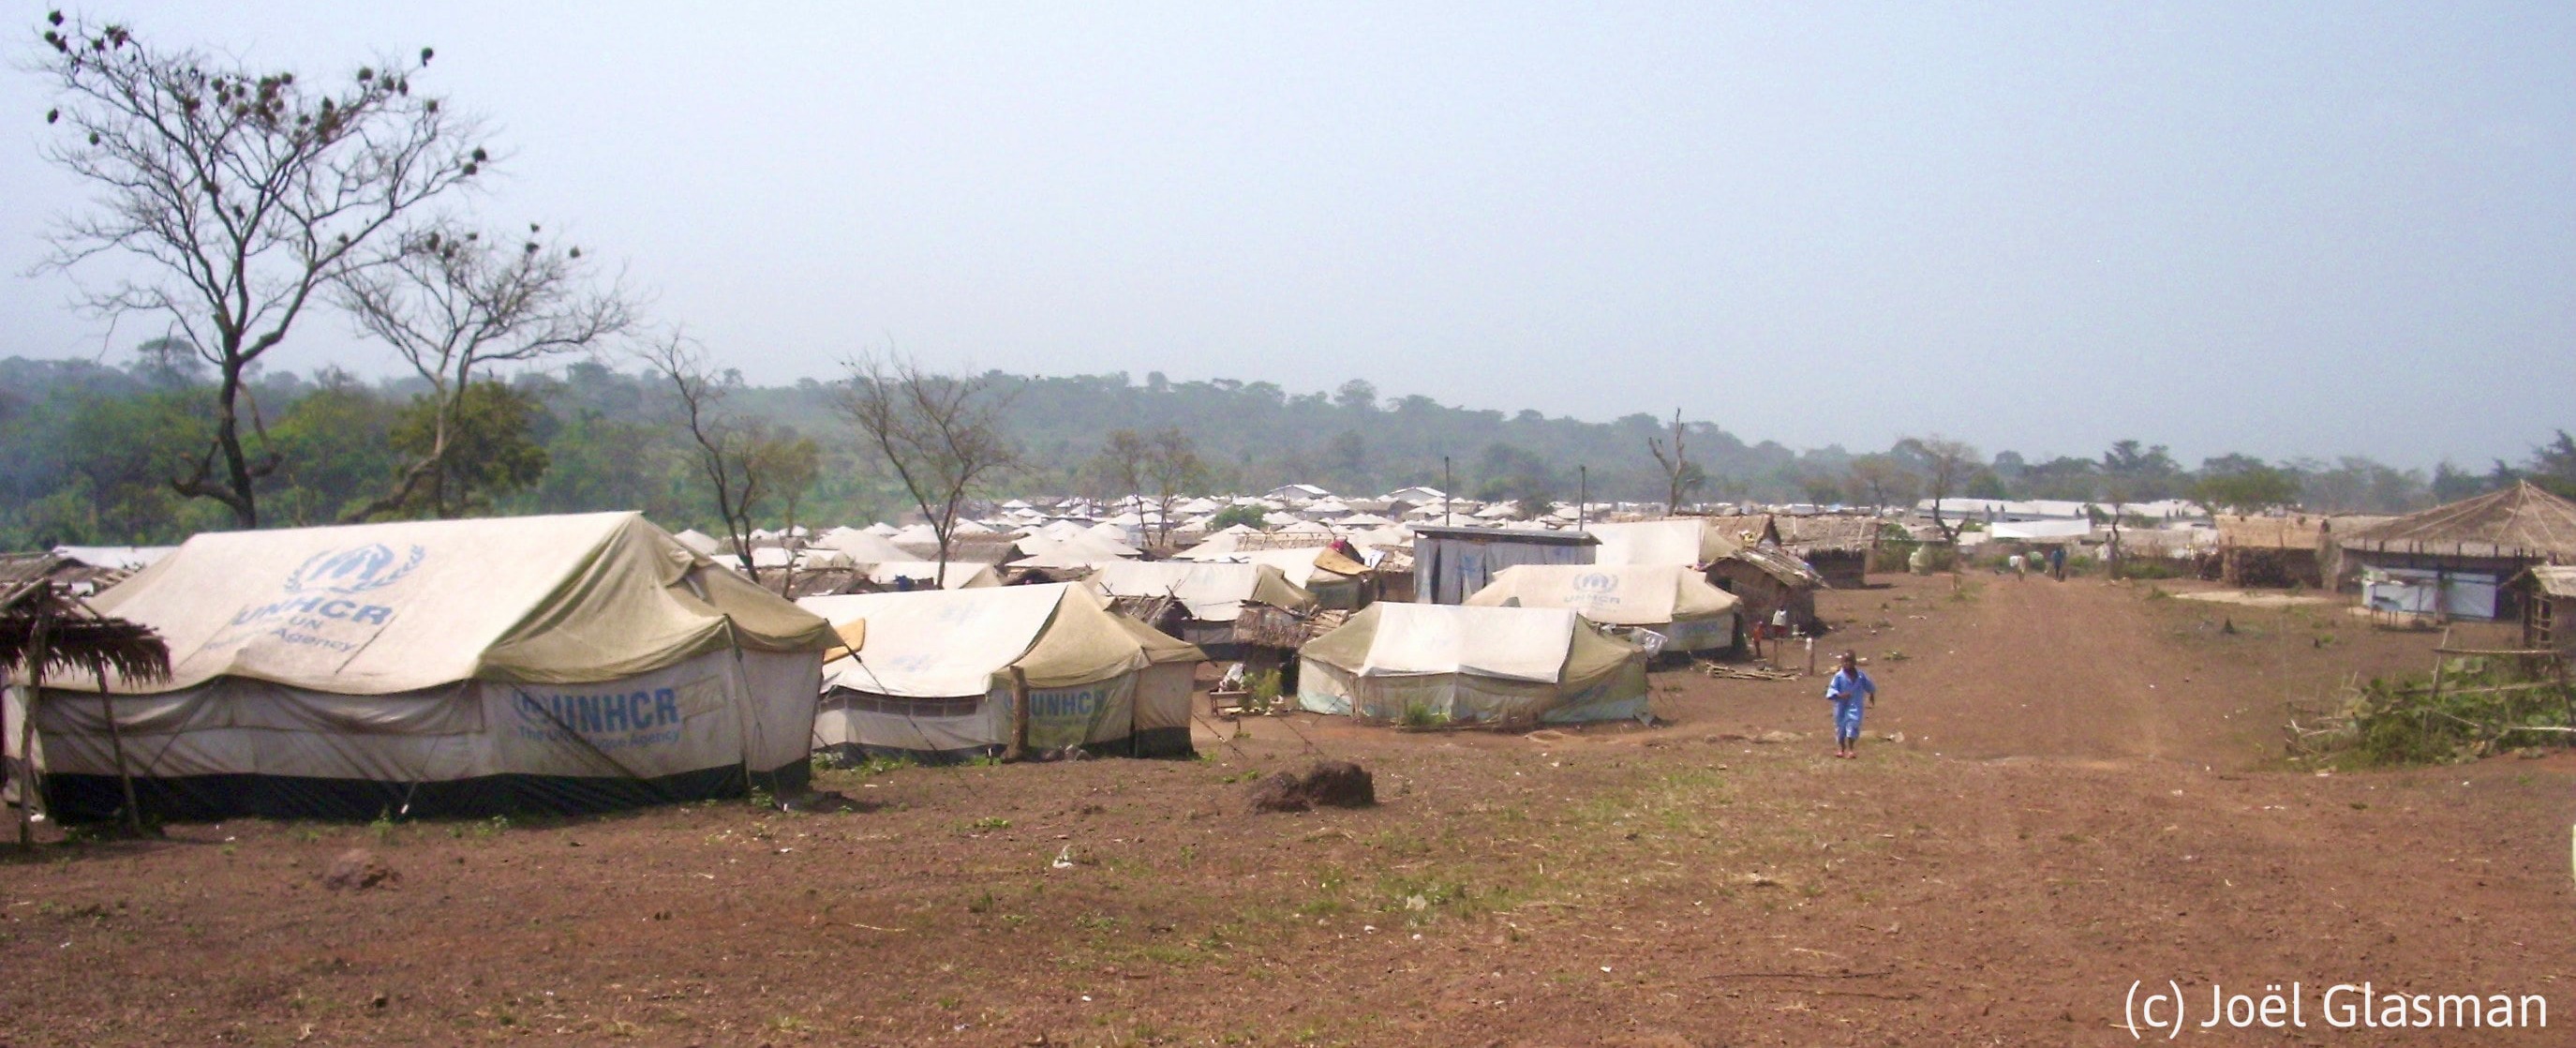 title picture Lolo refugee camp